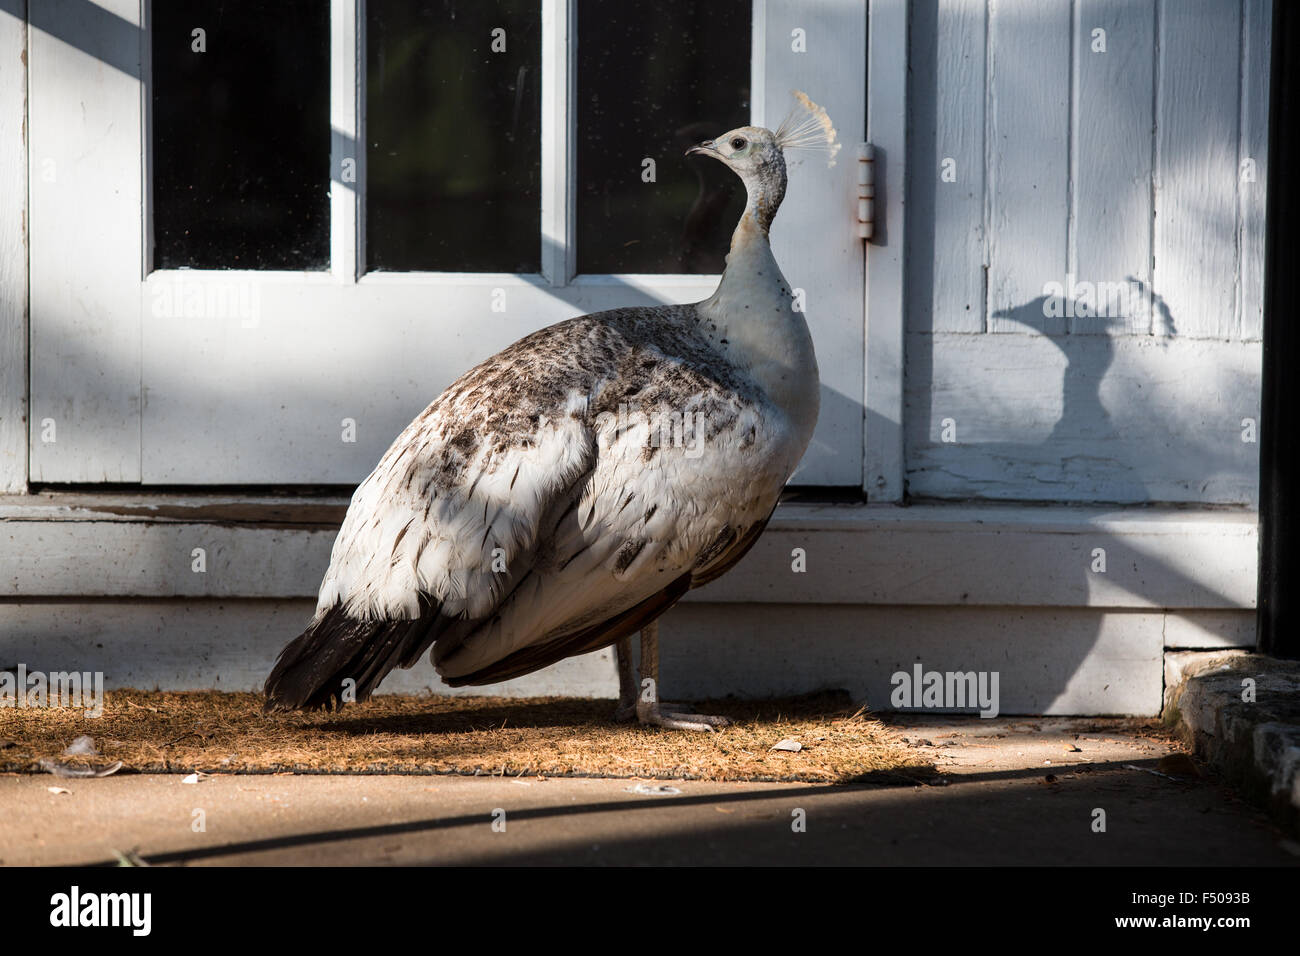 A white peafowl stands proudly by the door of a house Stock Photo